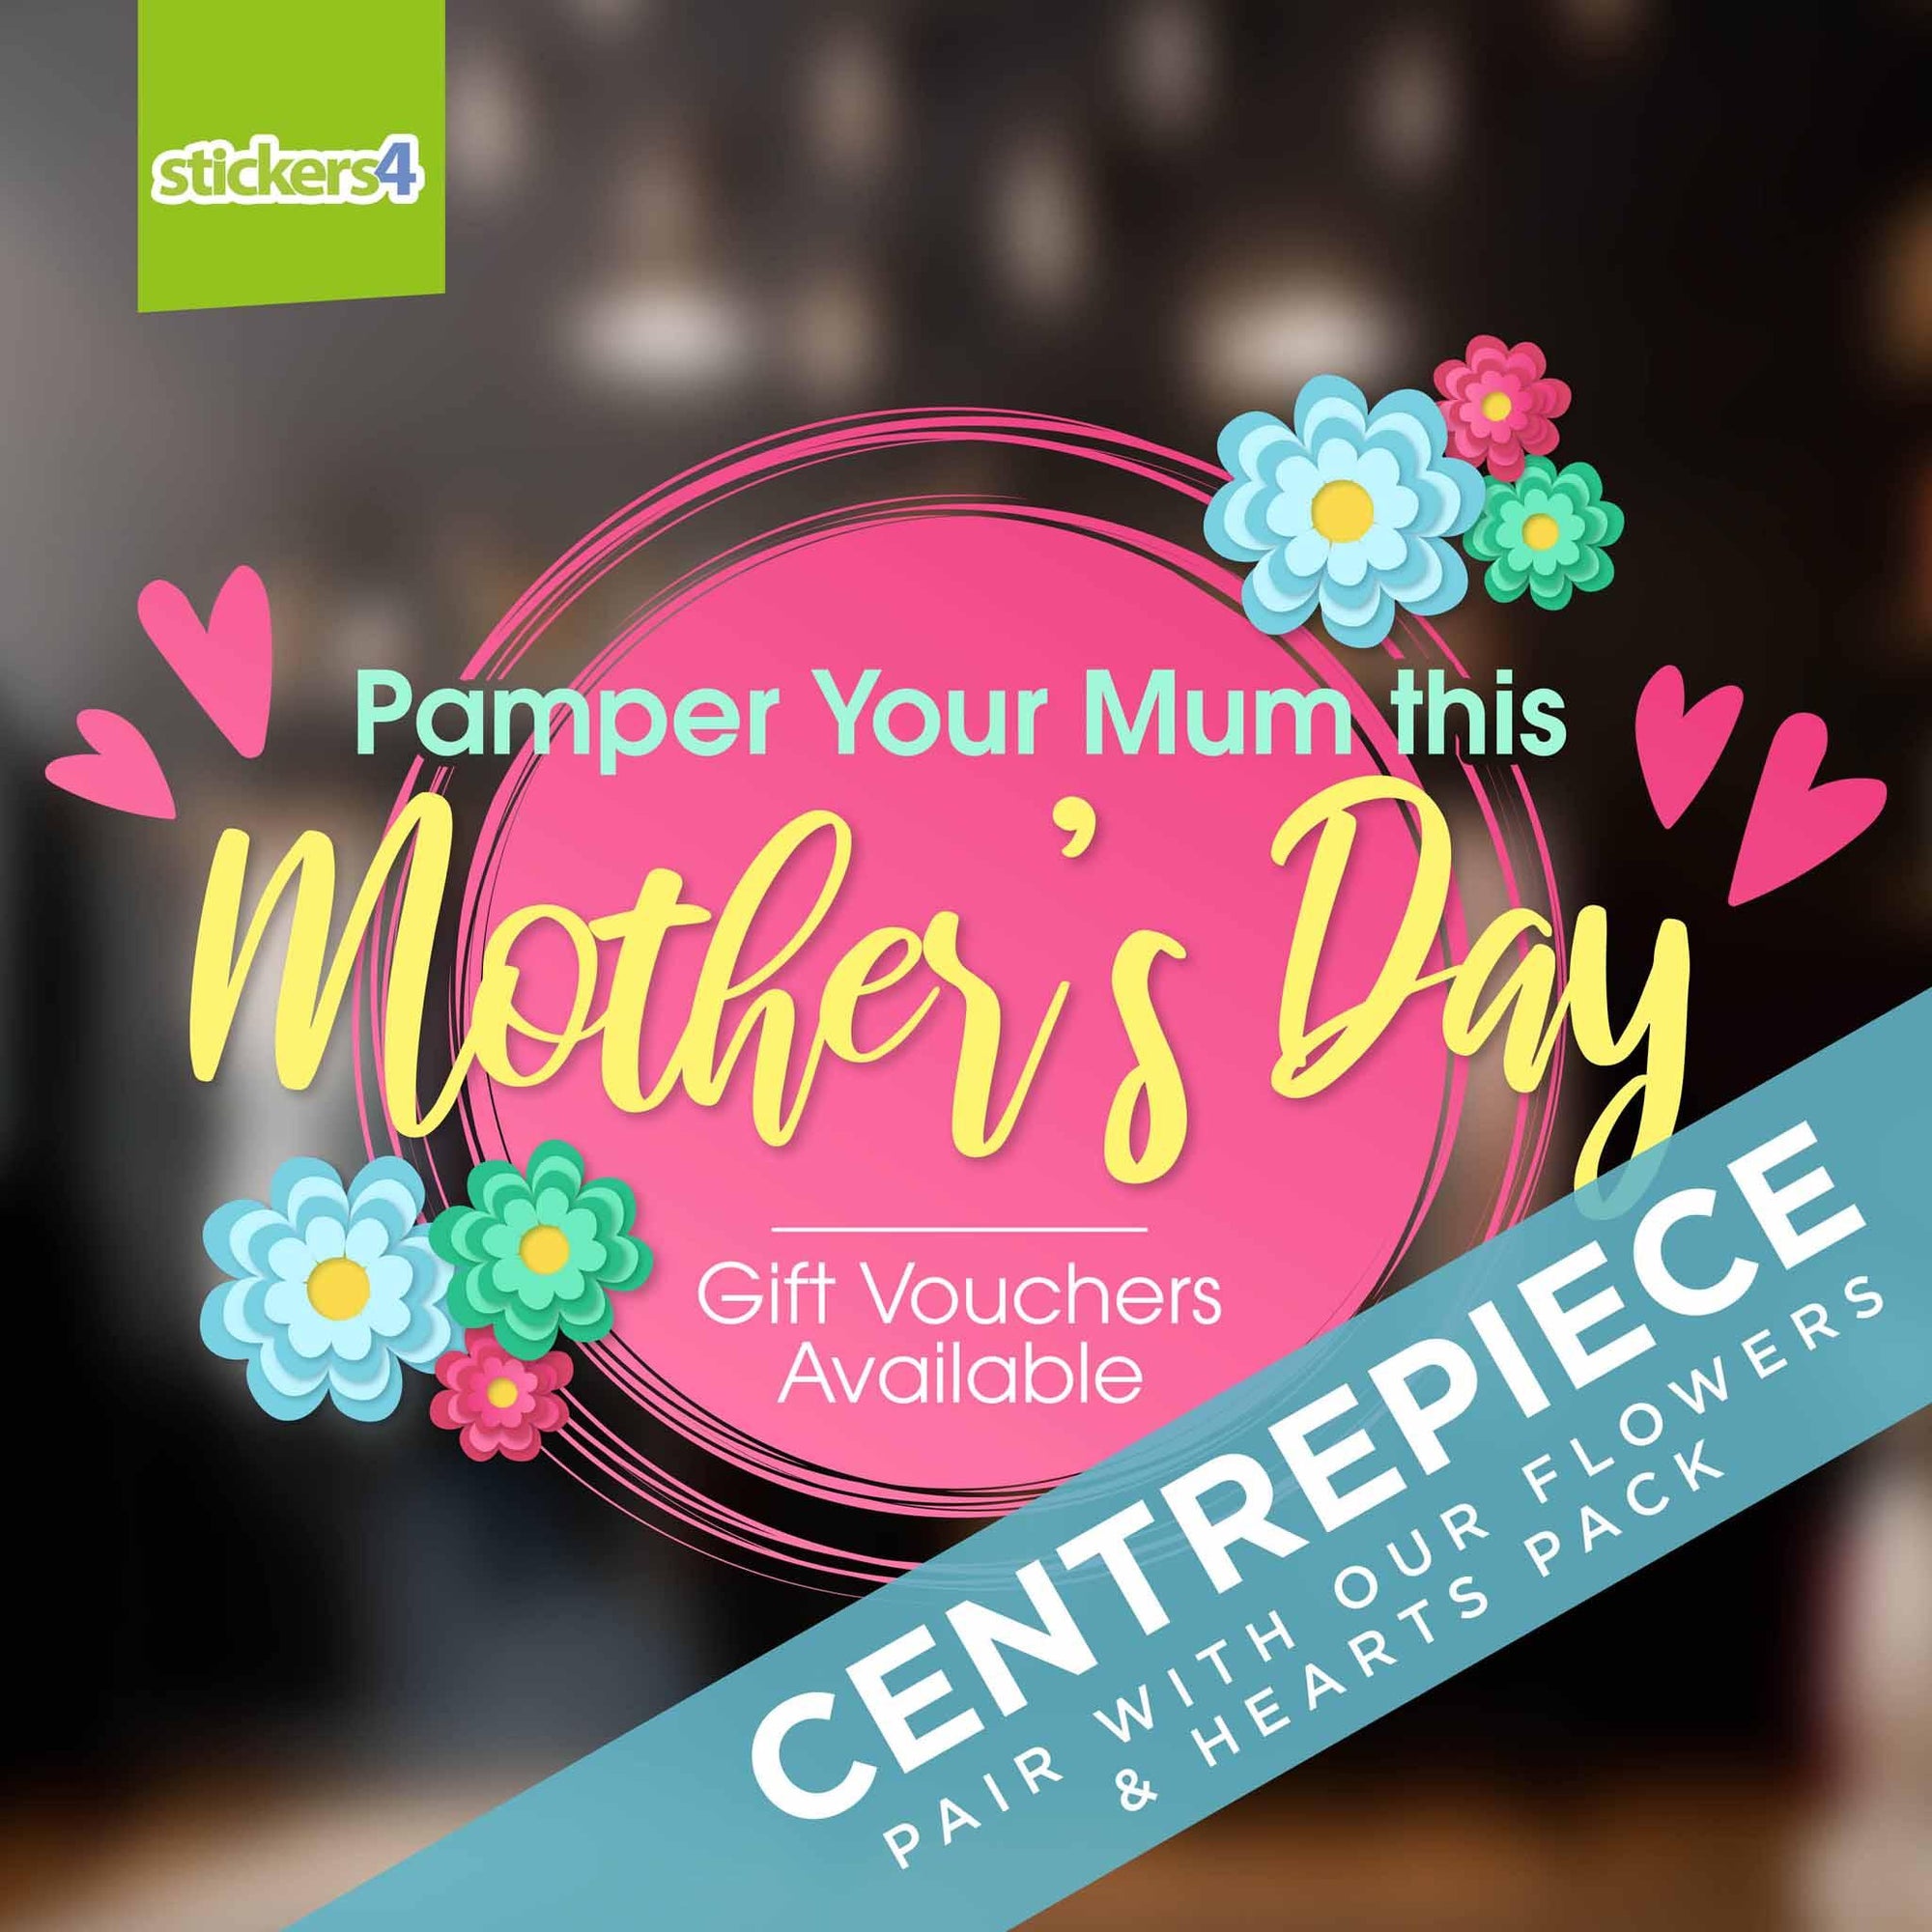 Pamper Your Mum this Mother's Day! Mother's Day Display